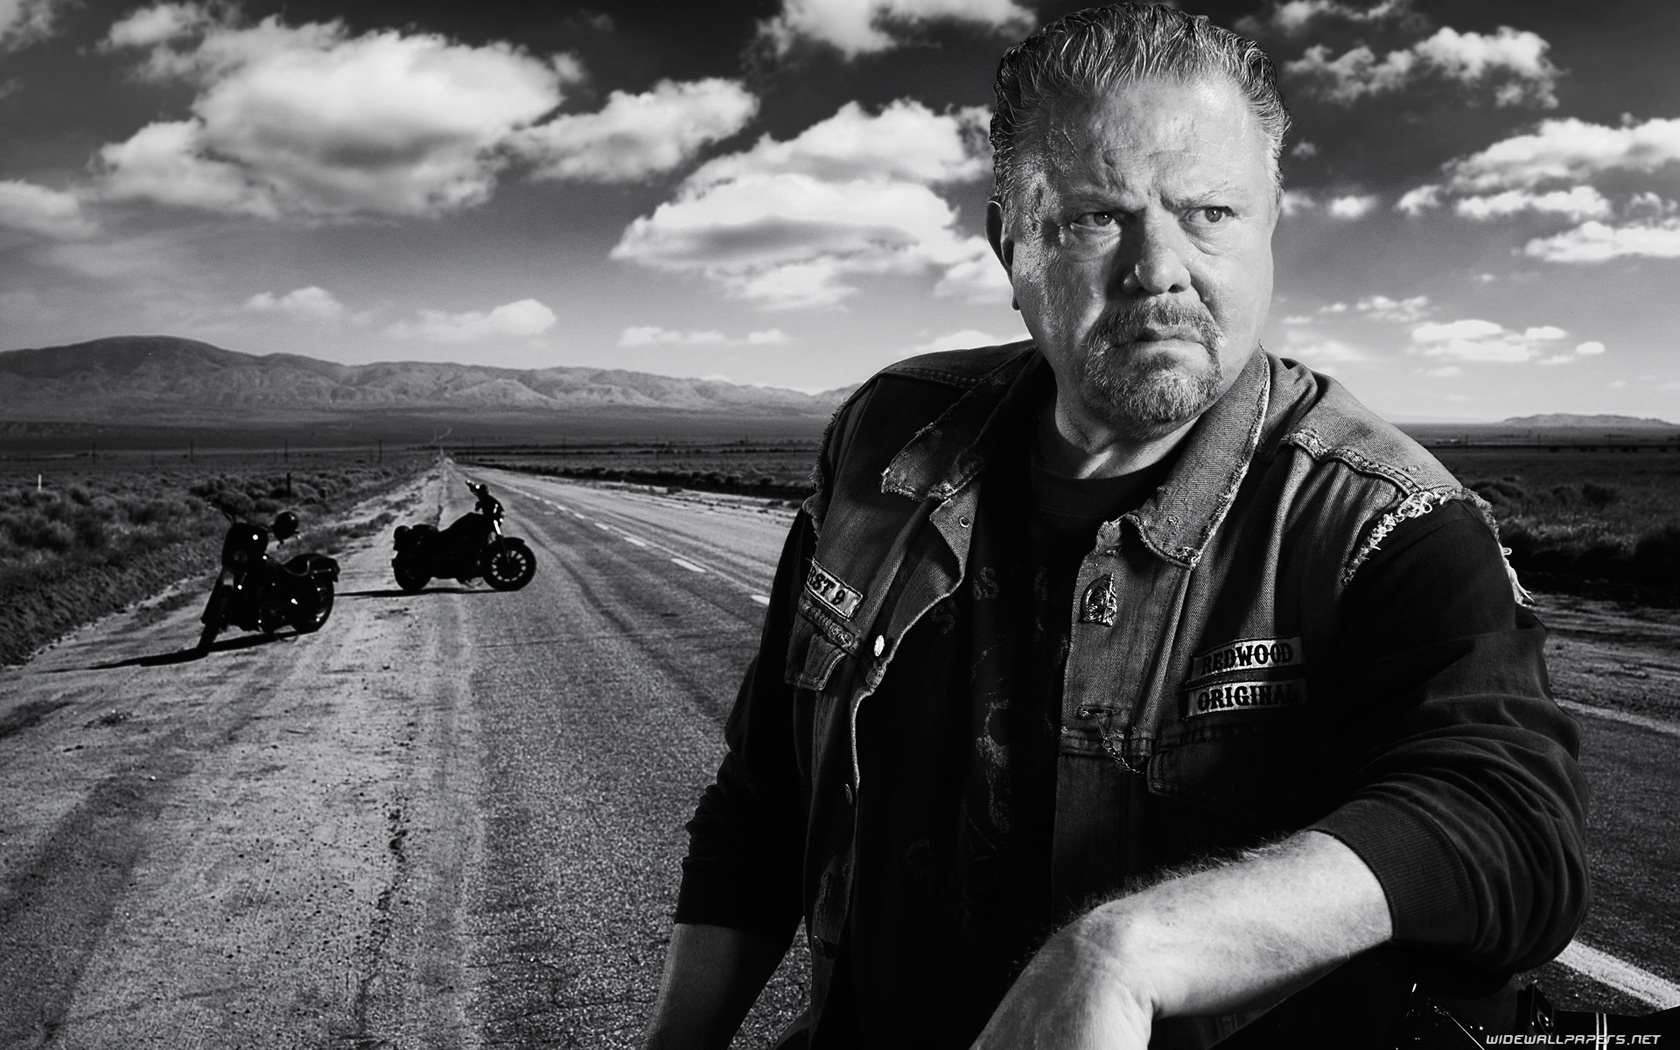 Sons Of Anarchy Tv Series Desktop Wallpaper HD And Wide